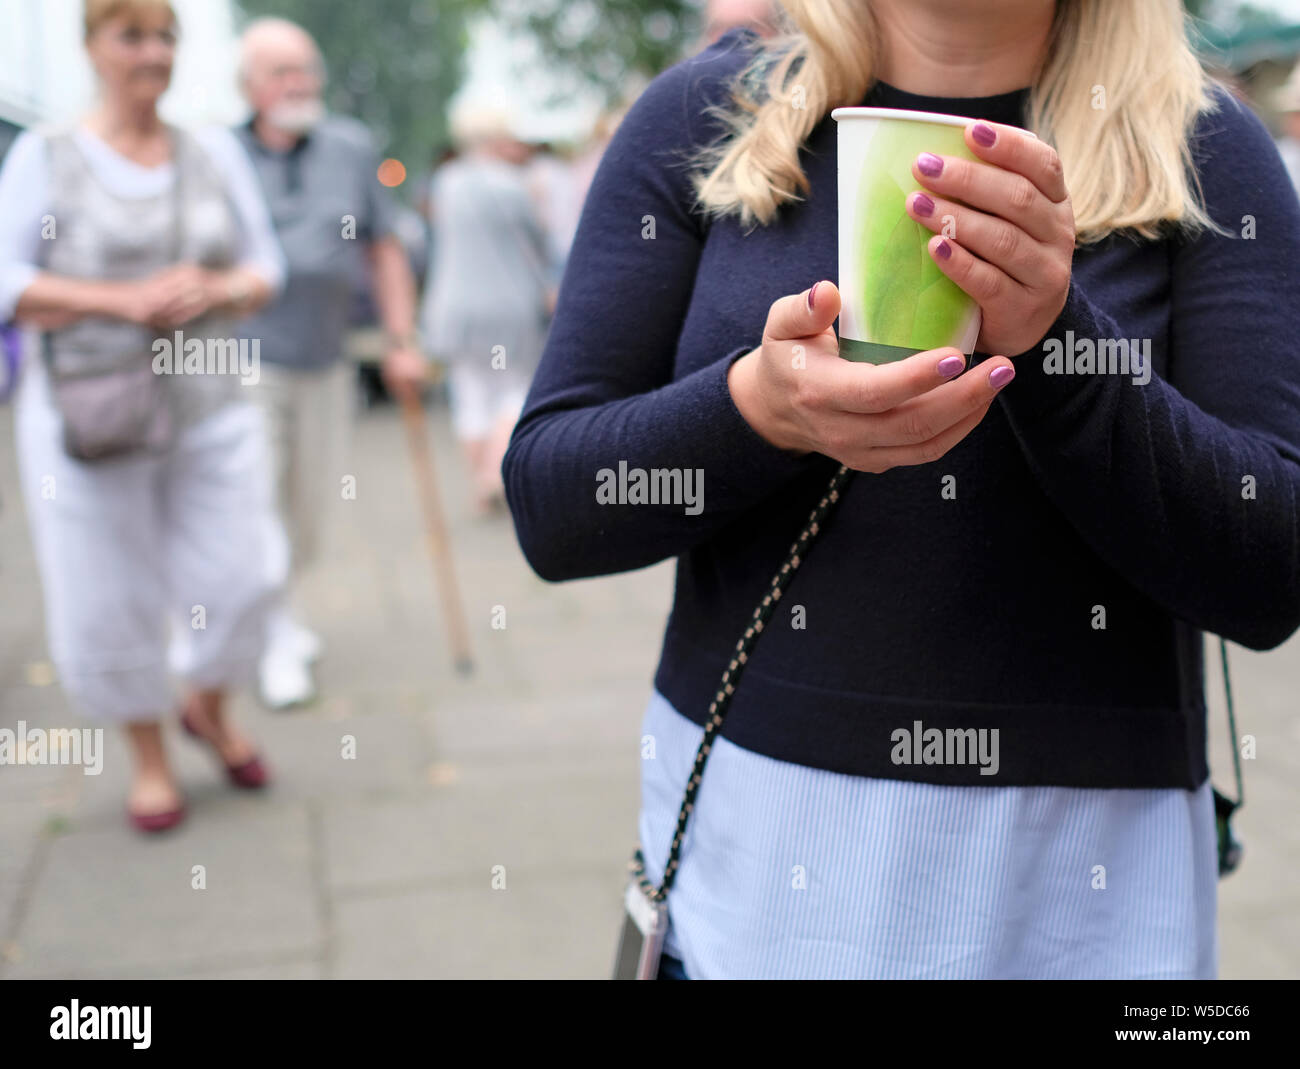 Girl holding a paper cup of coffee Stock Photo